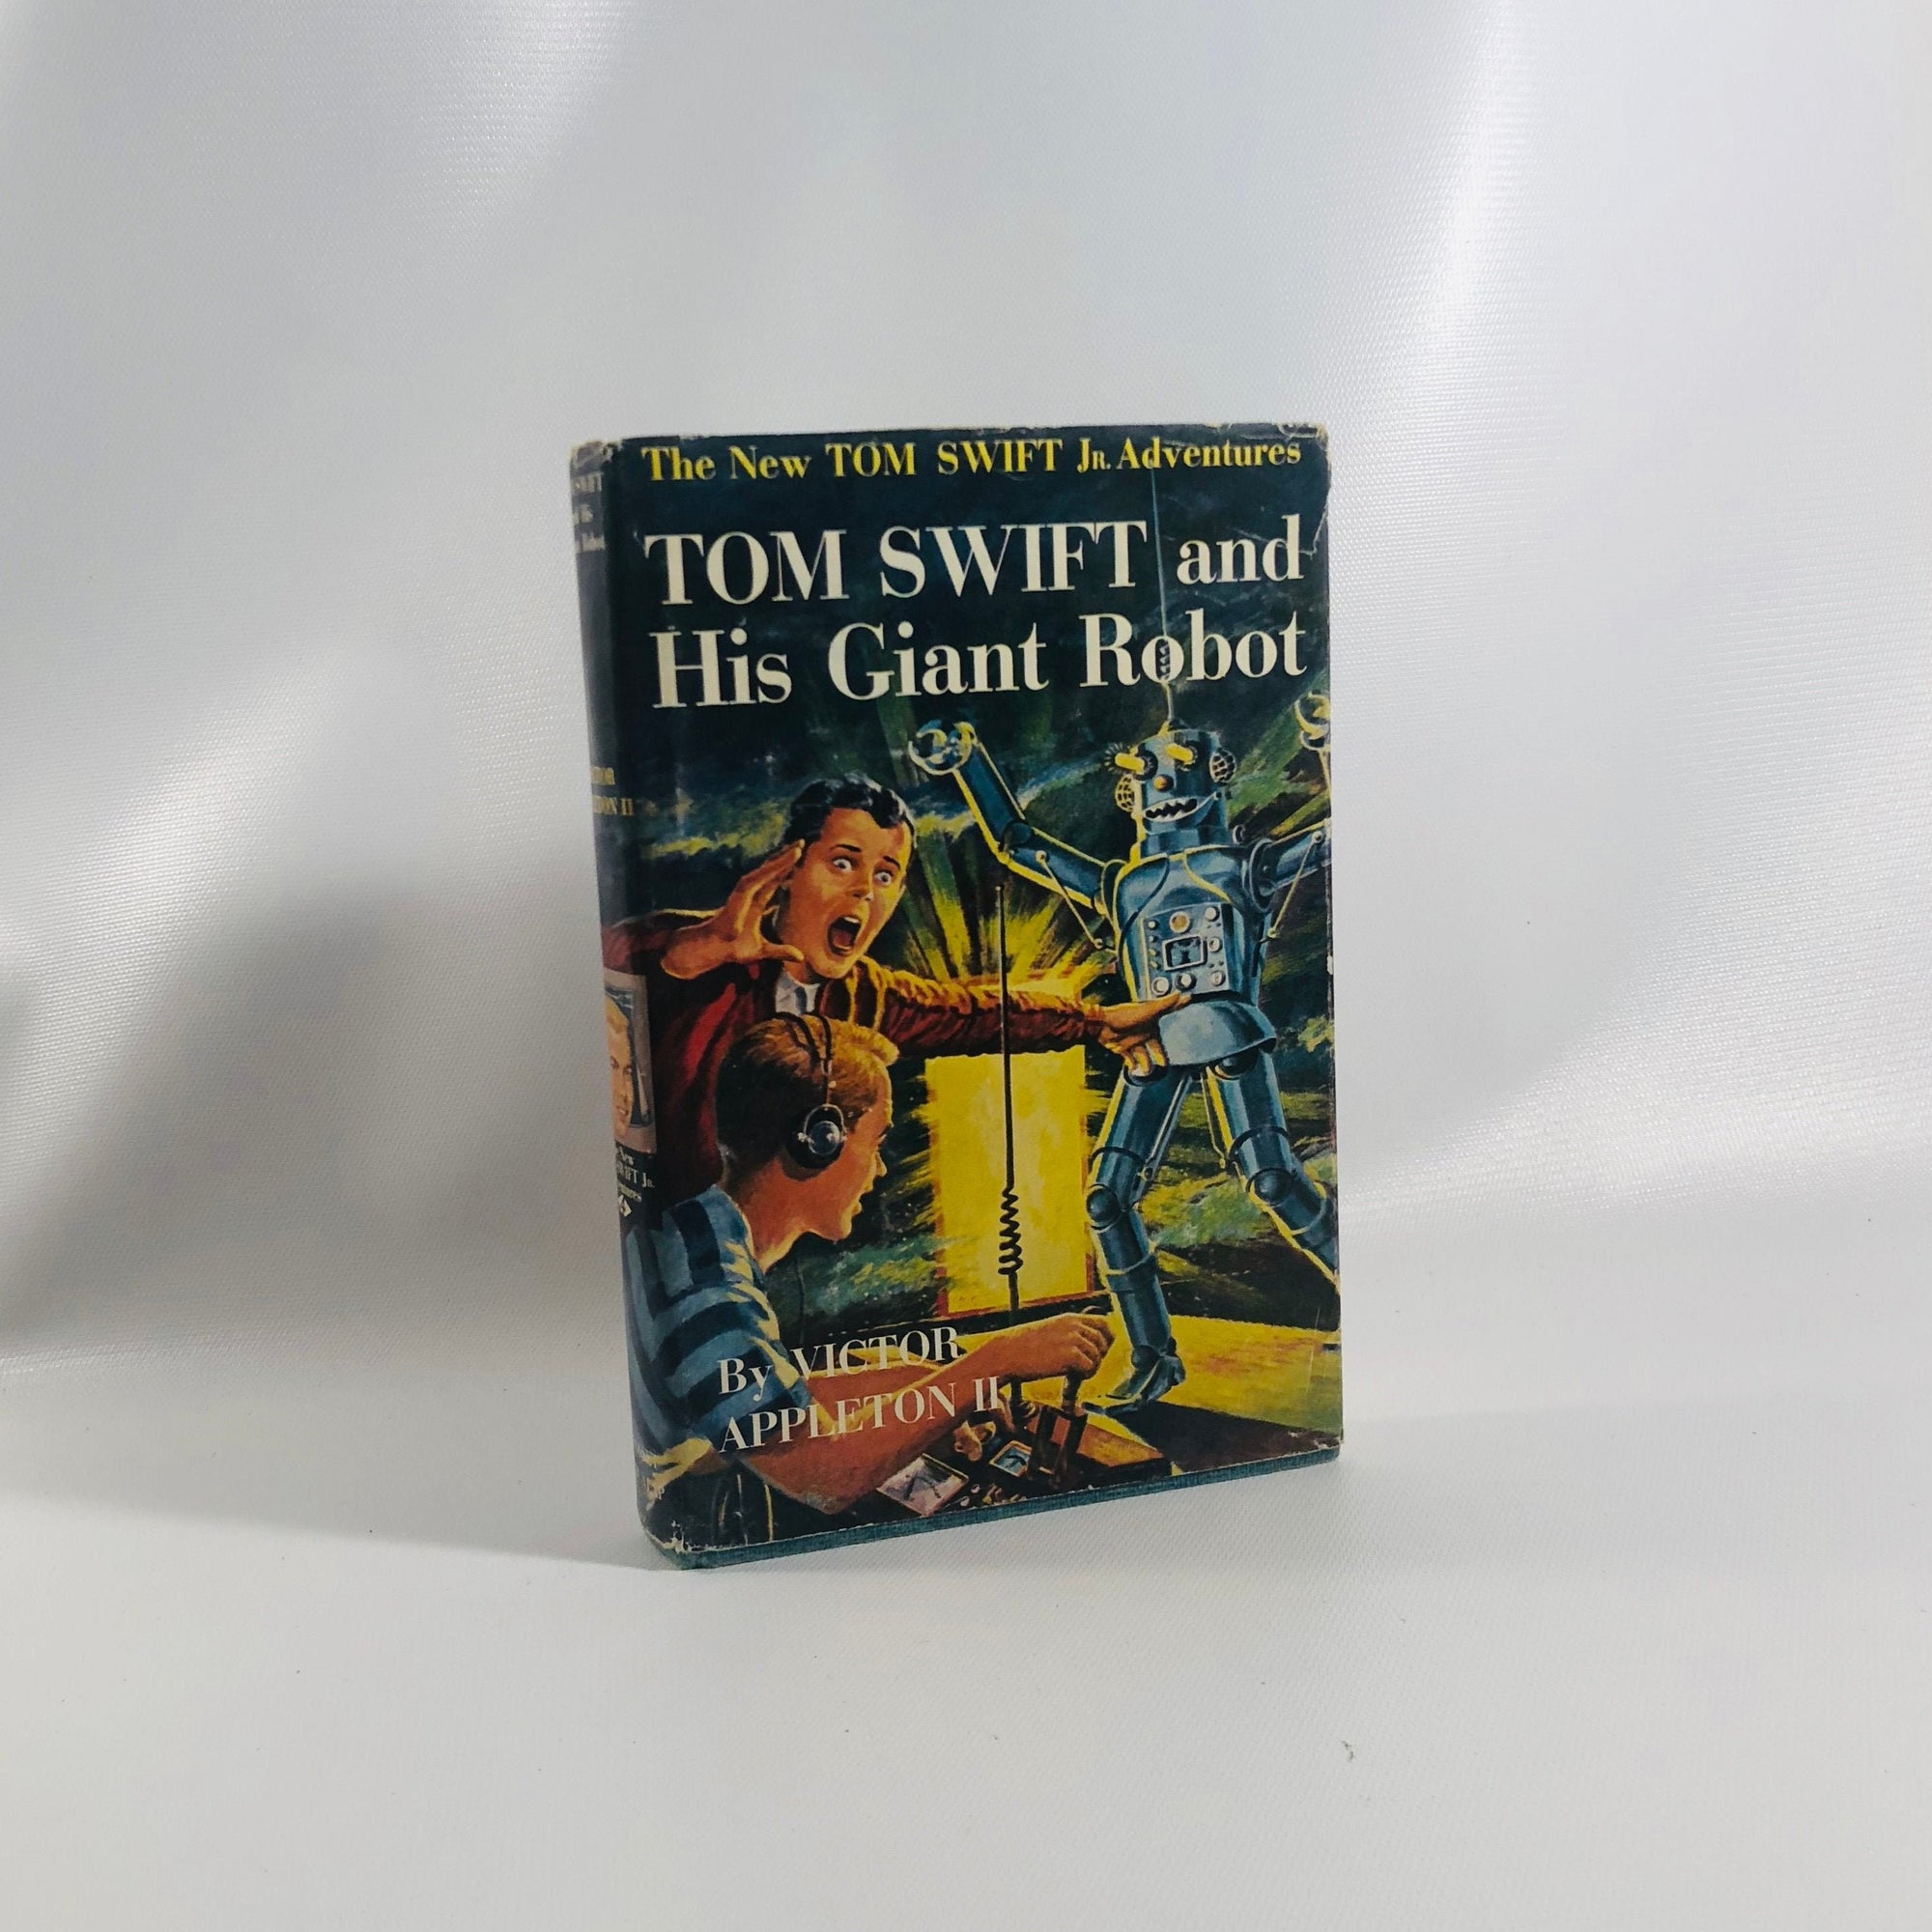 Tom Swift and His Giant Robot by Victor Appleton 1954 Book 4 in the Series of the New Tom Swift Jr. Adventures Vintage BookVintage Book